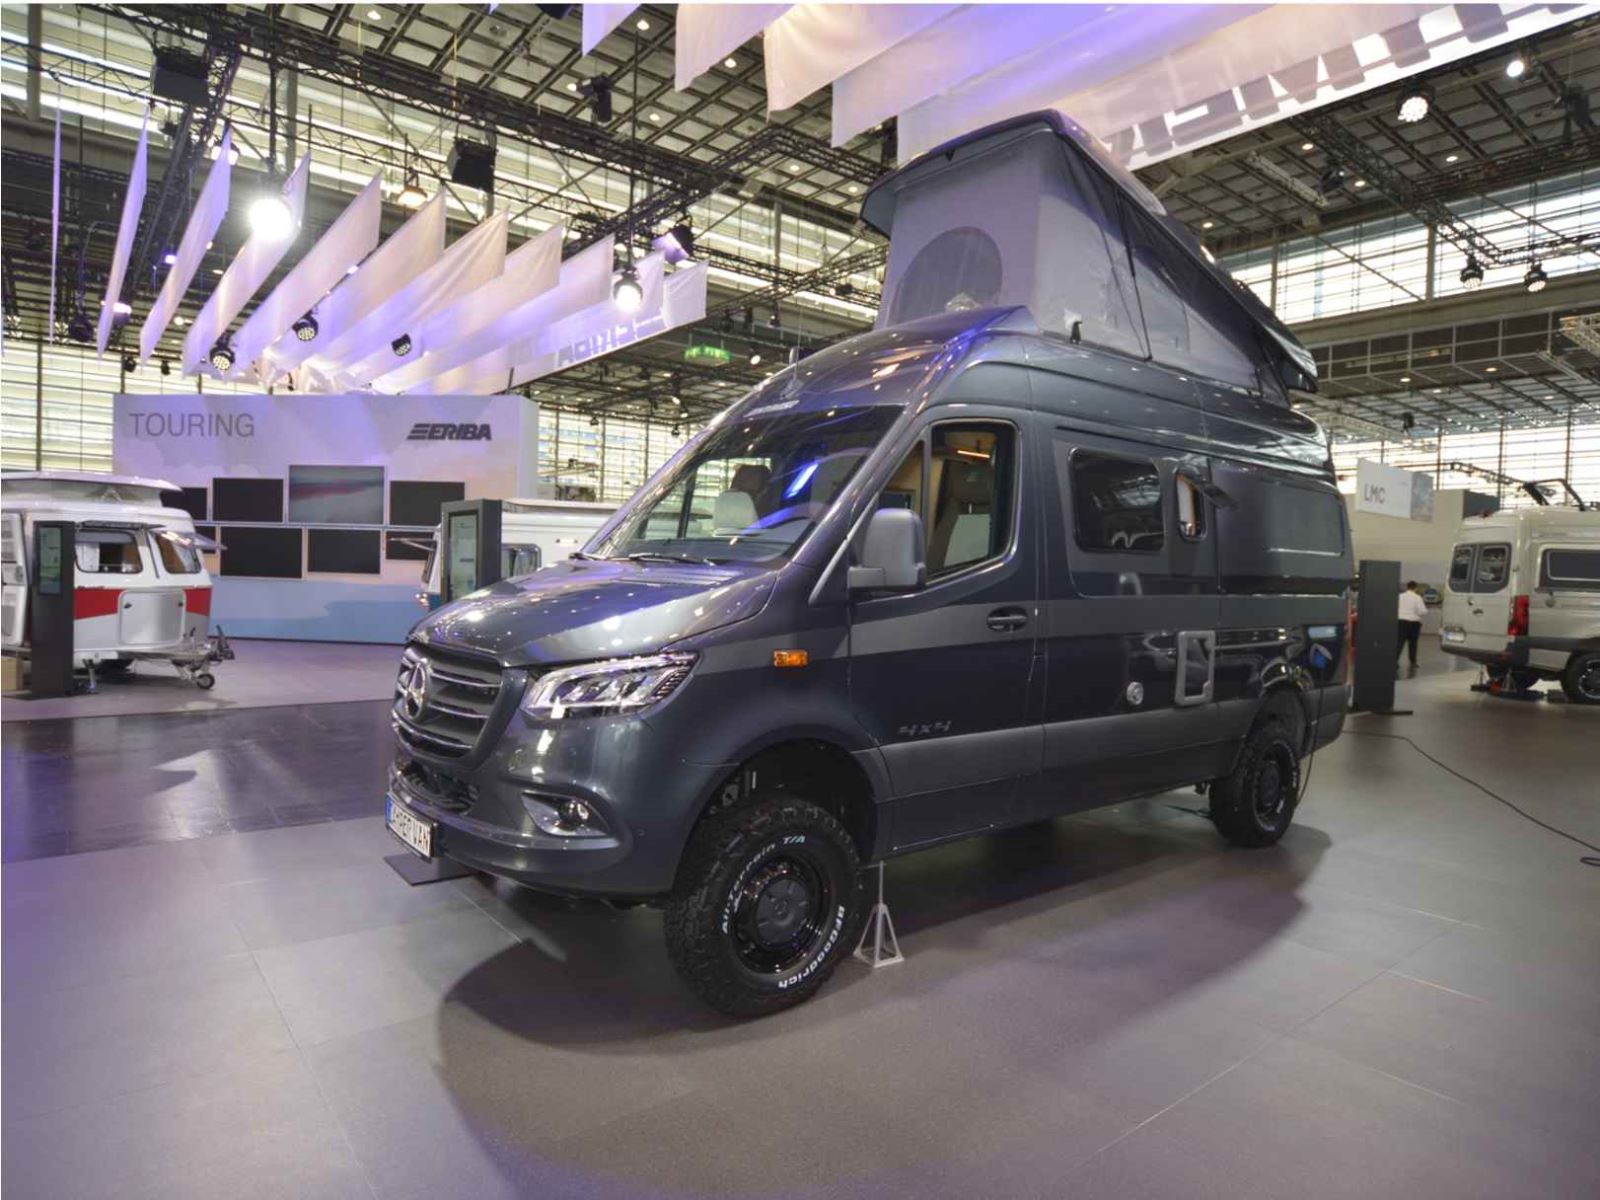 The Hymer Grand Canyon S